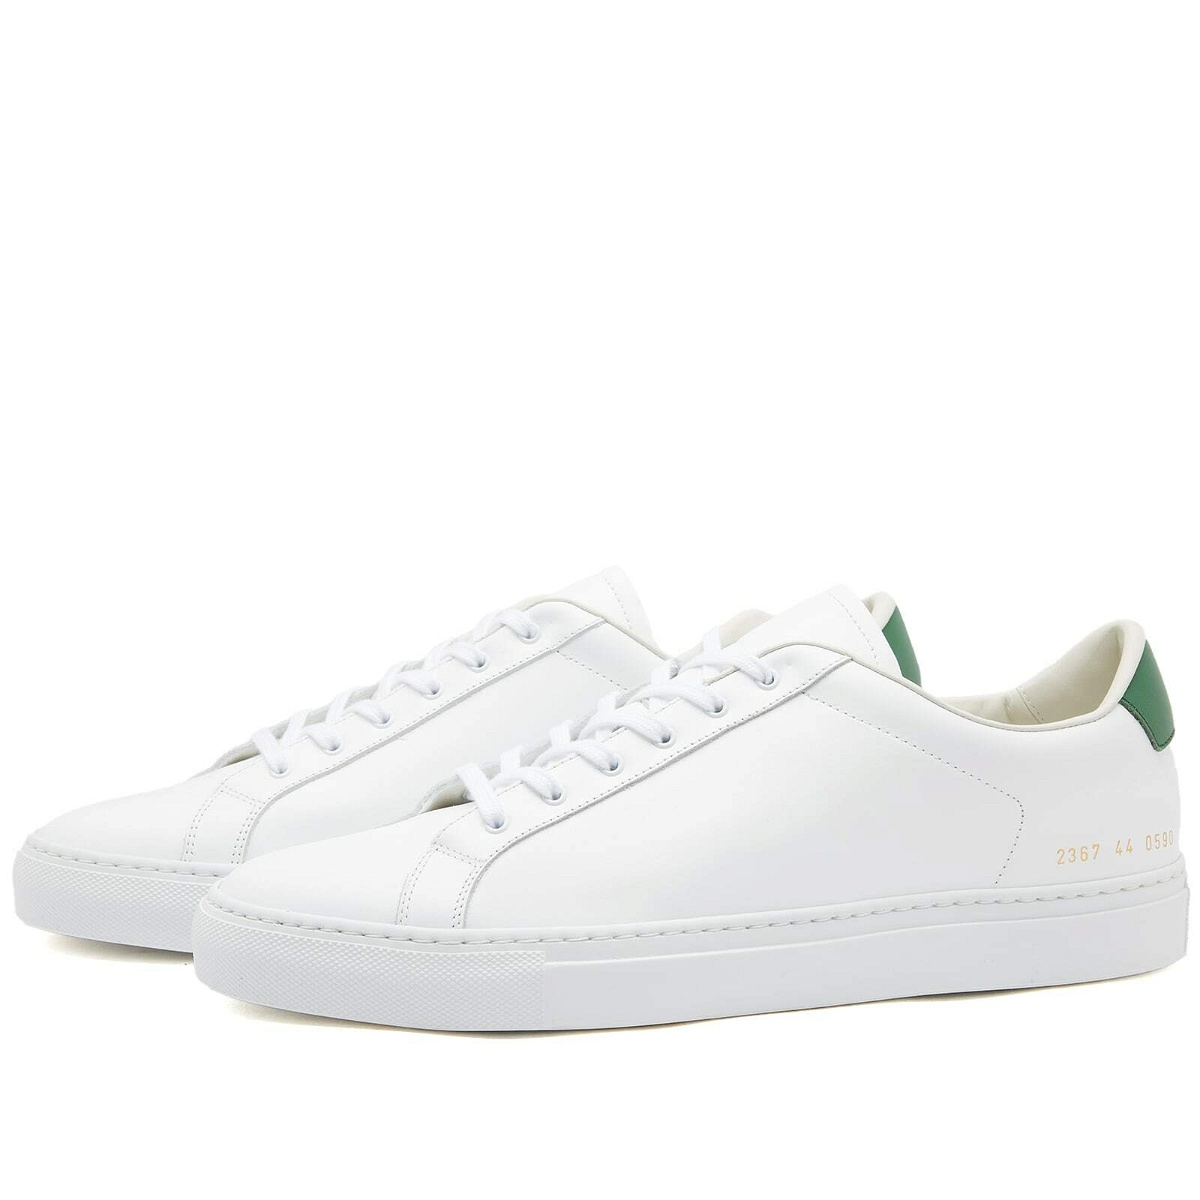 Photo: Common Projects Men's Retro Low Sneakers in White/Green